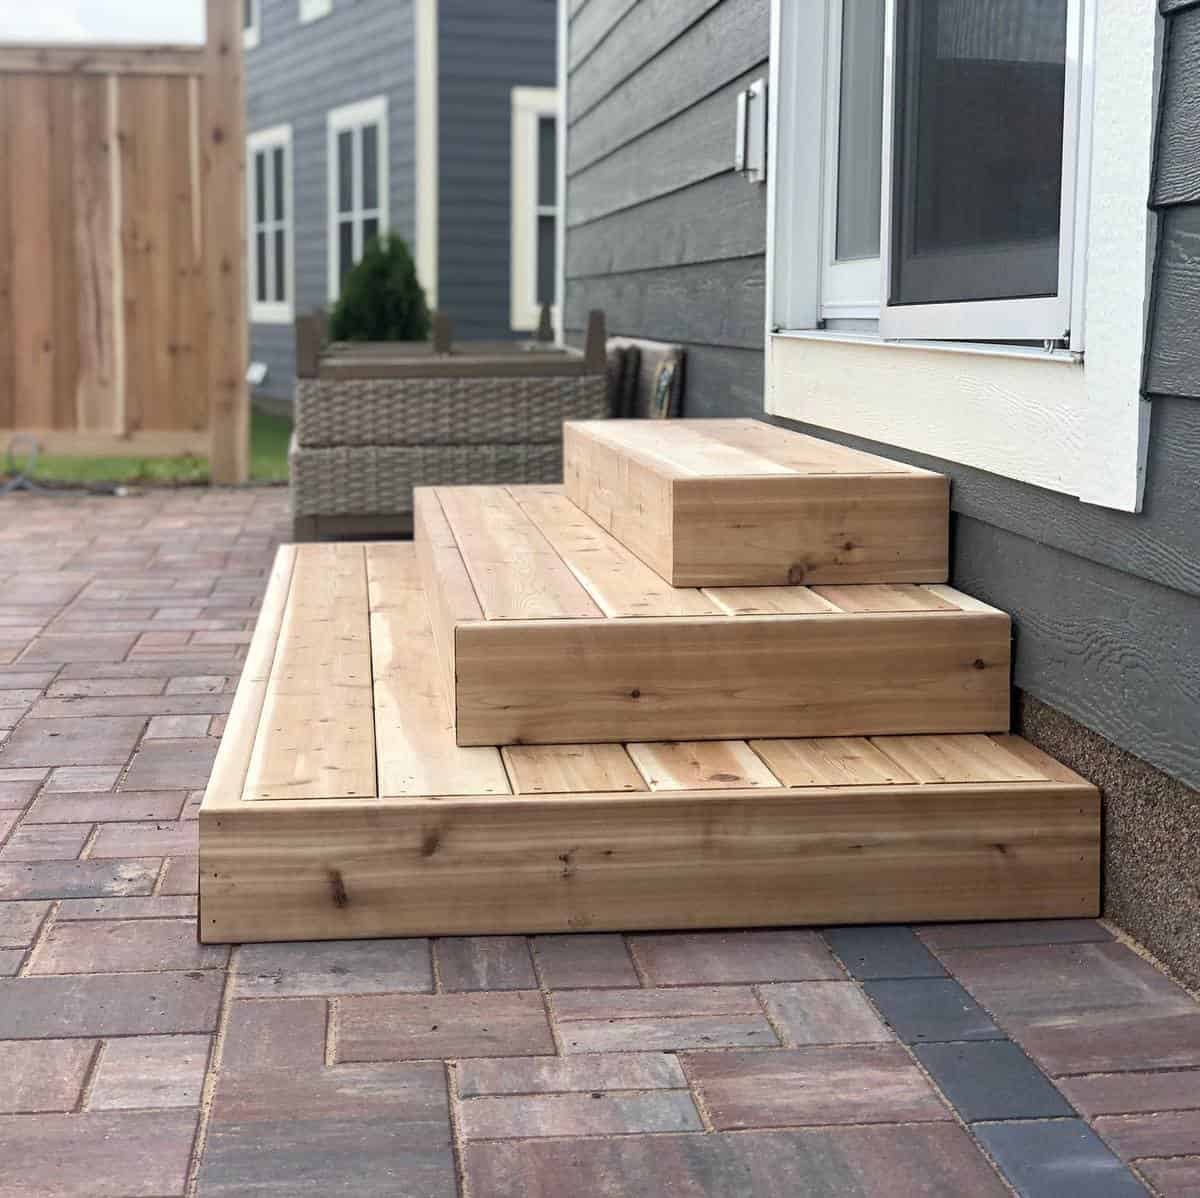 Wooden steps into the backyard